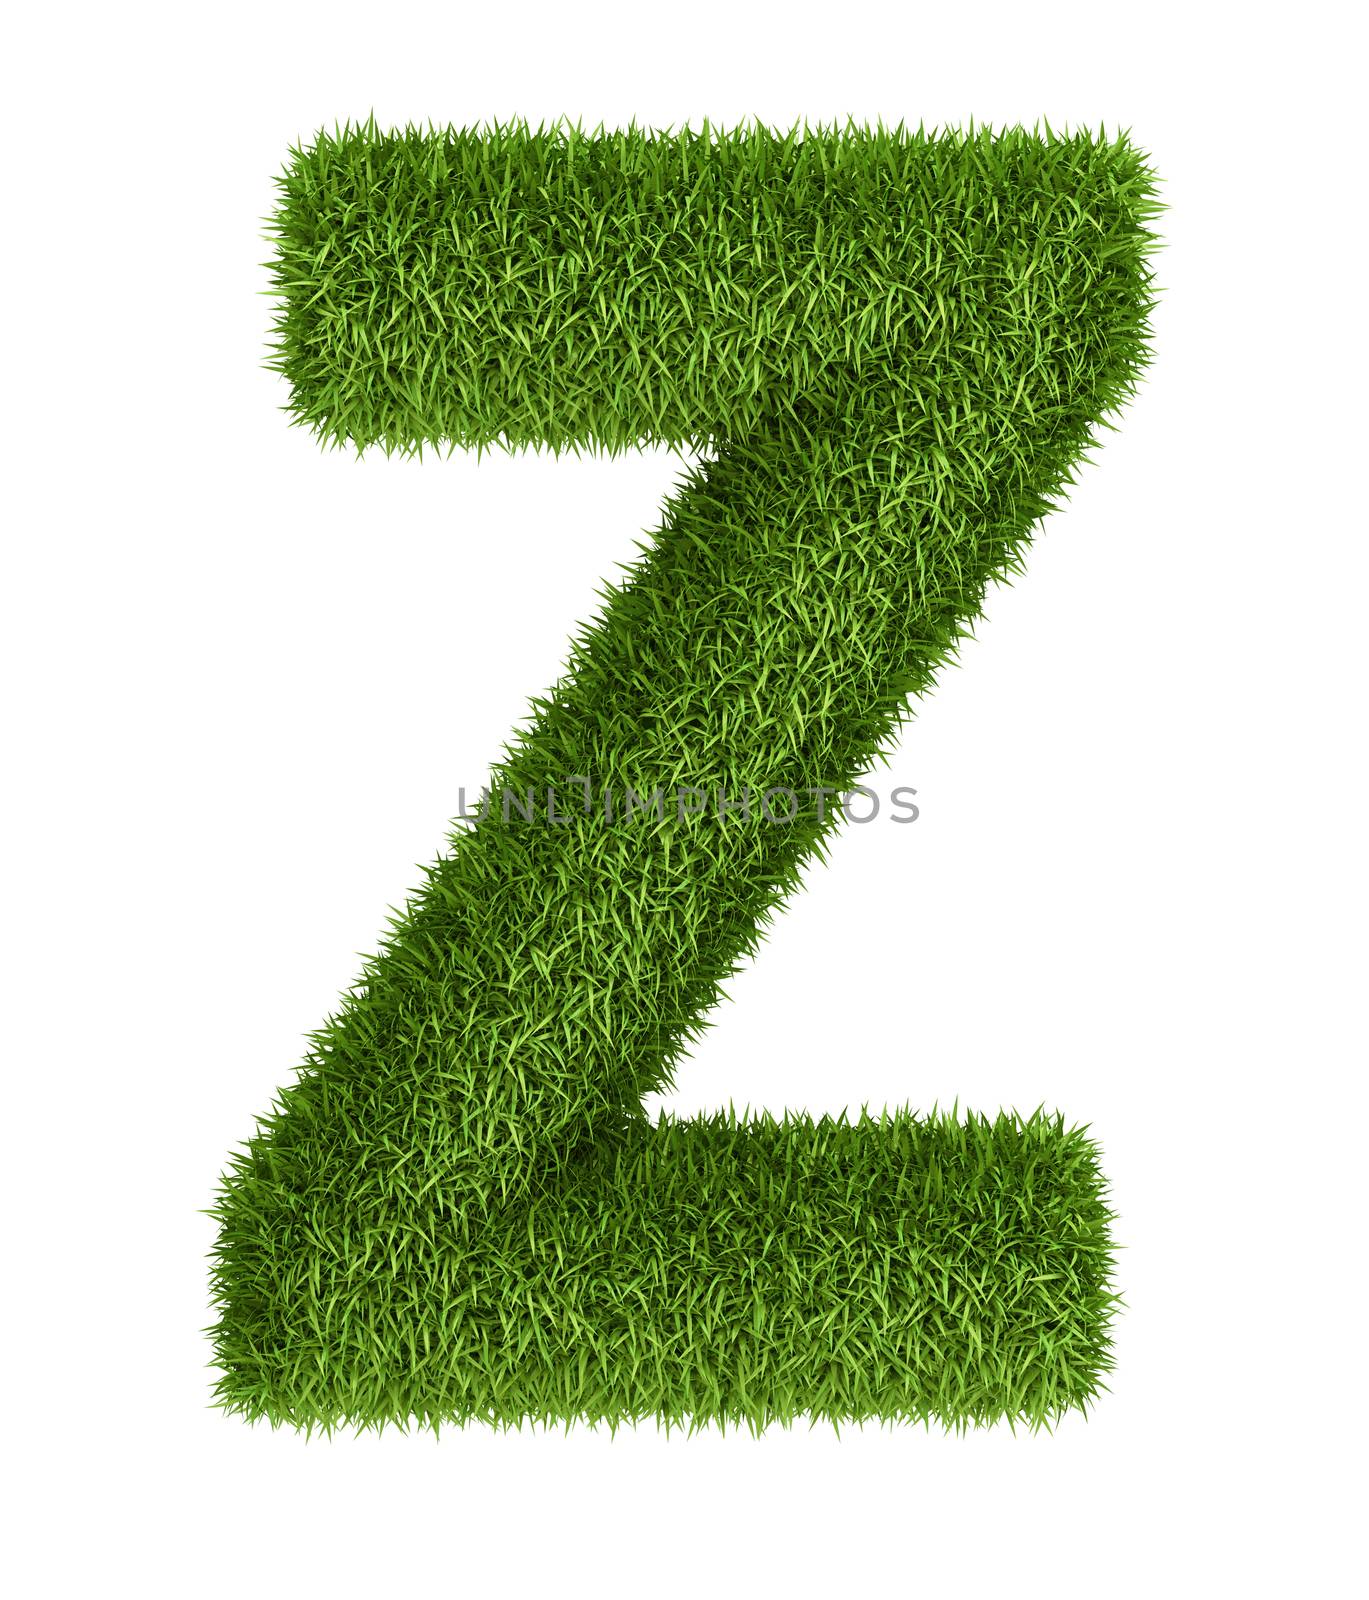 Natural grass letter Z by iunewind